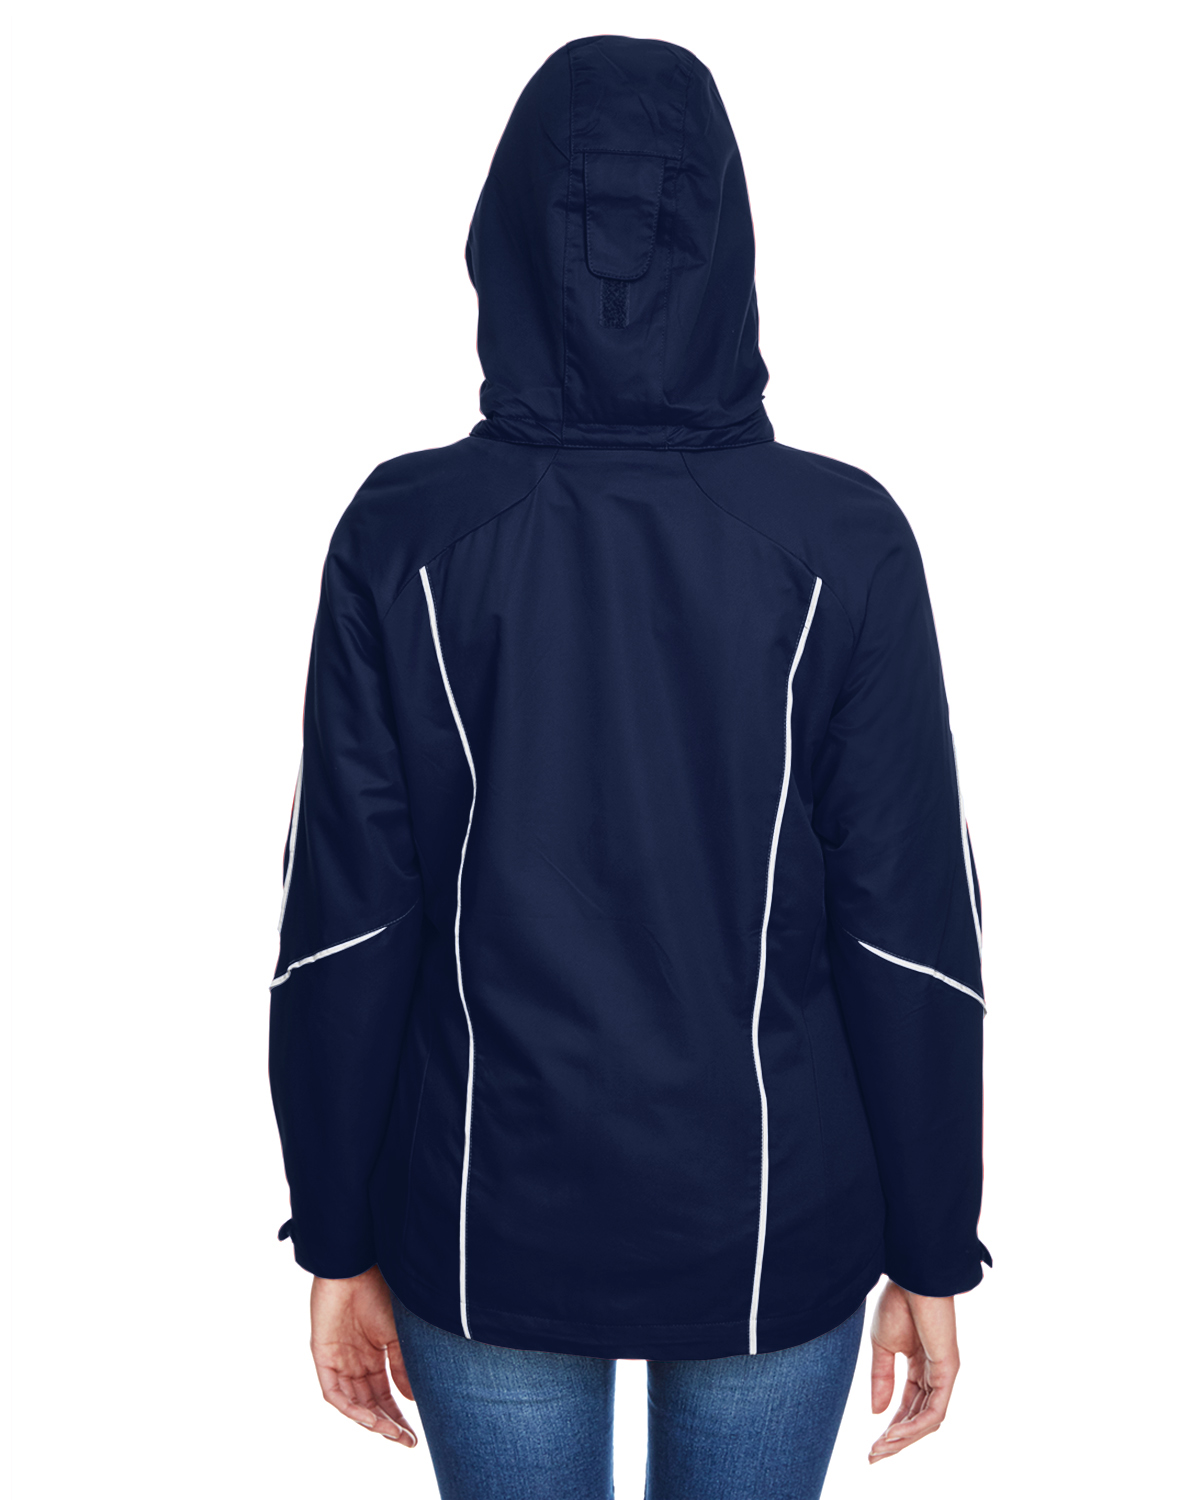 Ladies' Angle 3-in-1 Jacket with Bonded Fleece Liner - NIGHT - XS - image 2 of 3